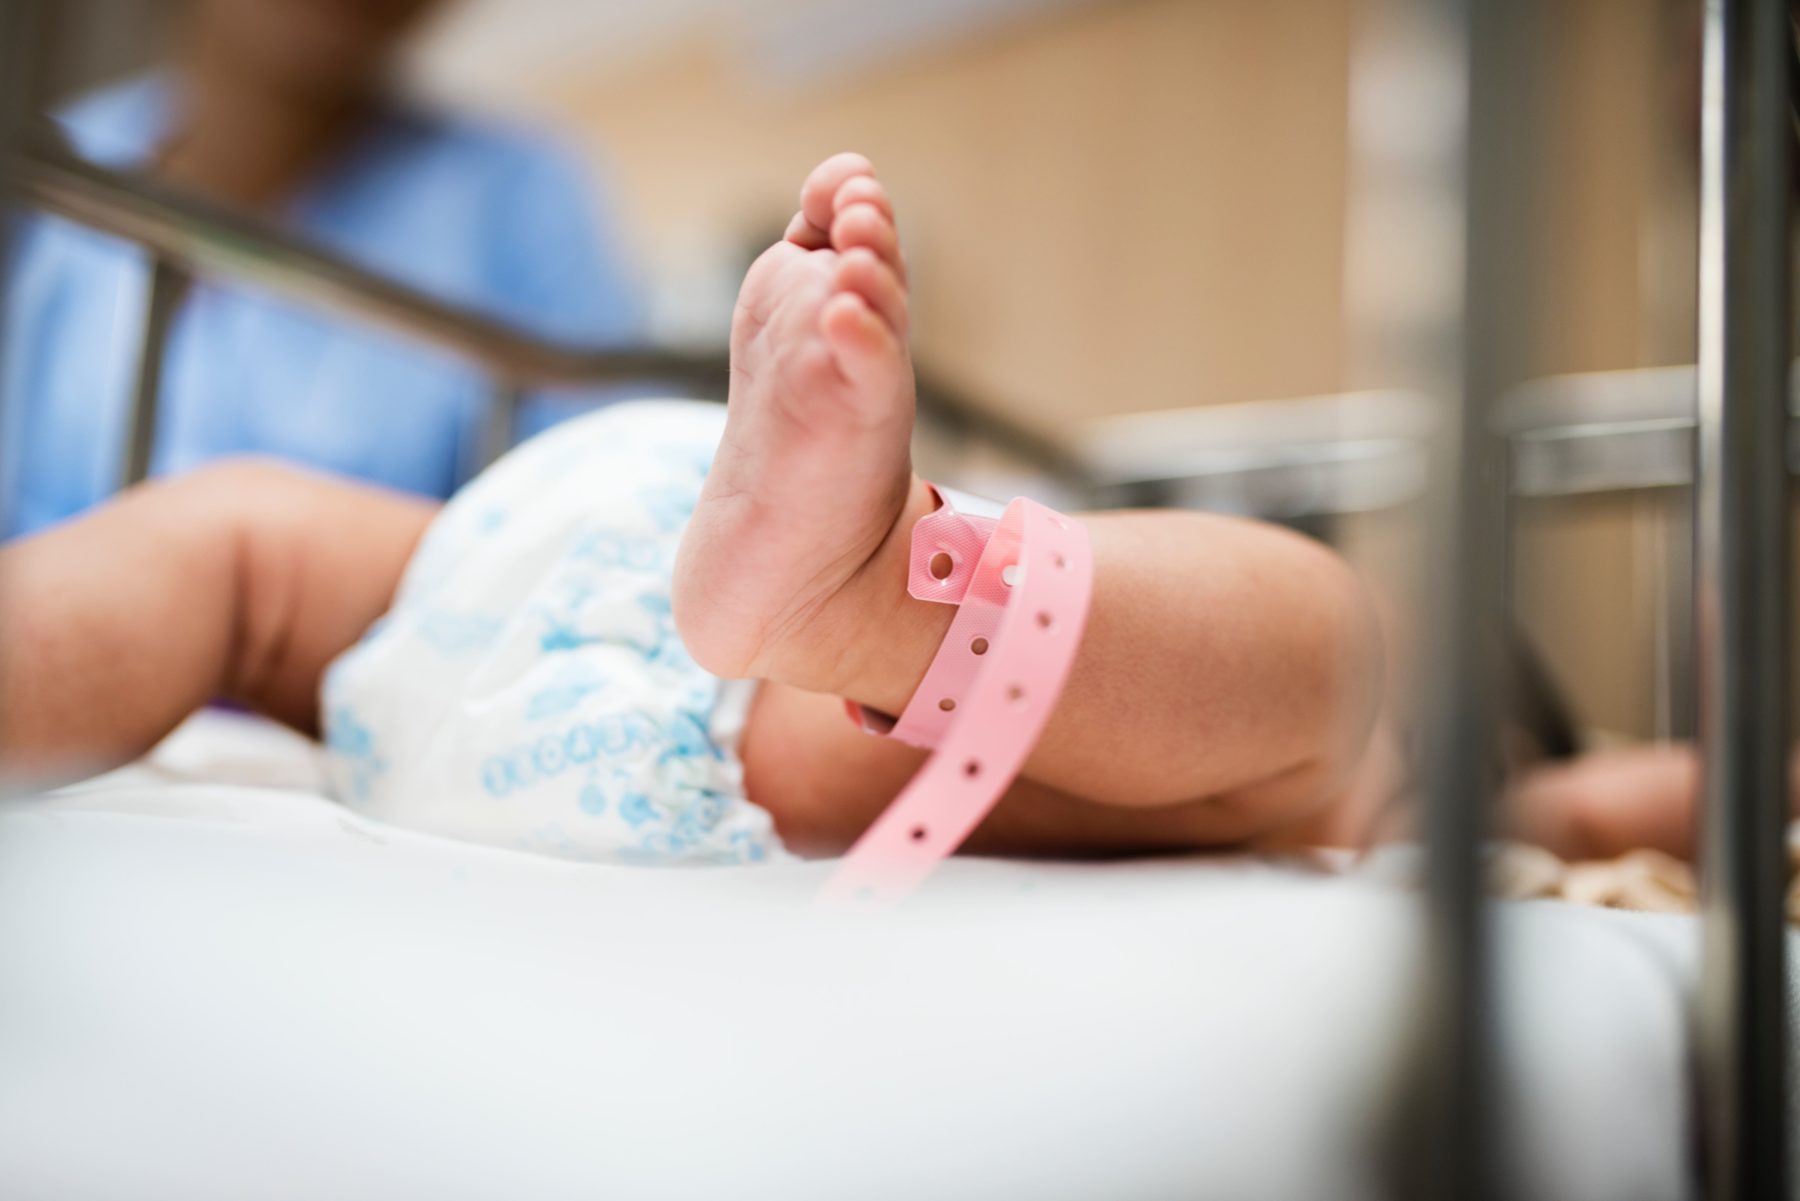 Research has shown that cue-based feeding for late preterm infants offers benefits, and it can be easy to read the cues if you're observant.